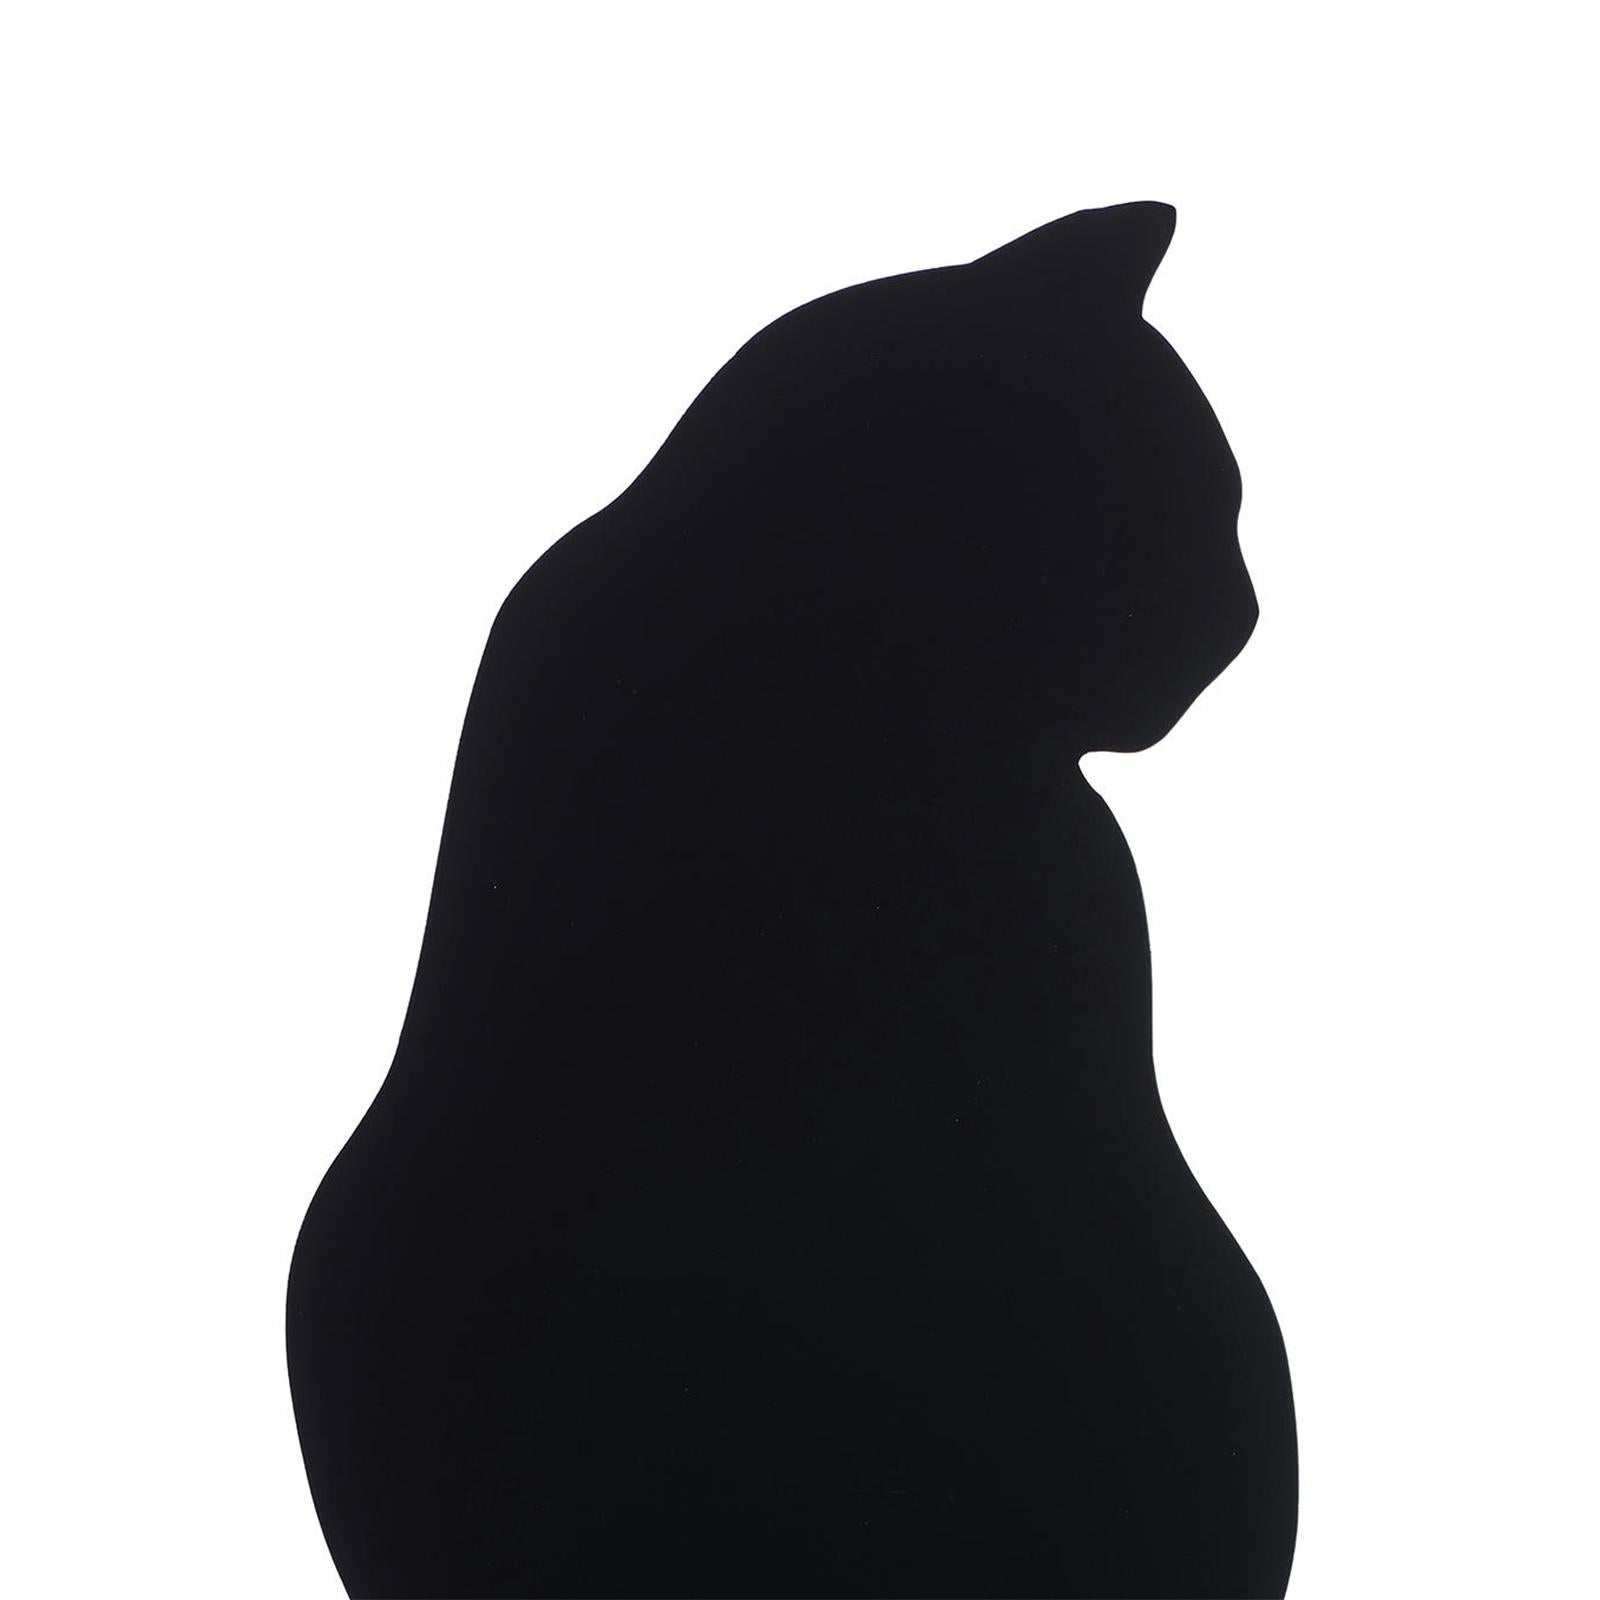 Sculpture Cat Shadow C all in steel
in black finish. Flat decoration piece.
On steel round base: 16cm diameter.
Available with other cat shadows.